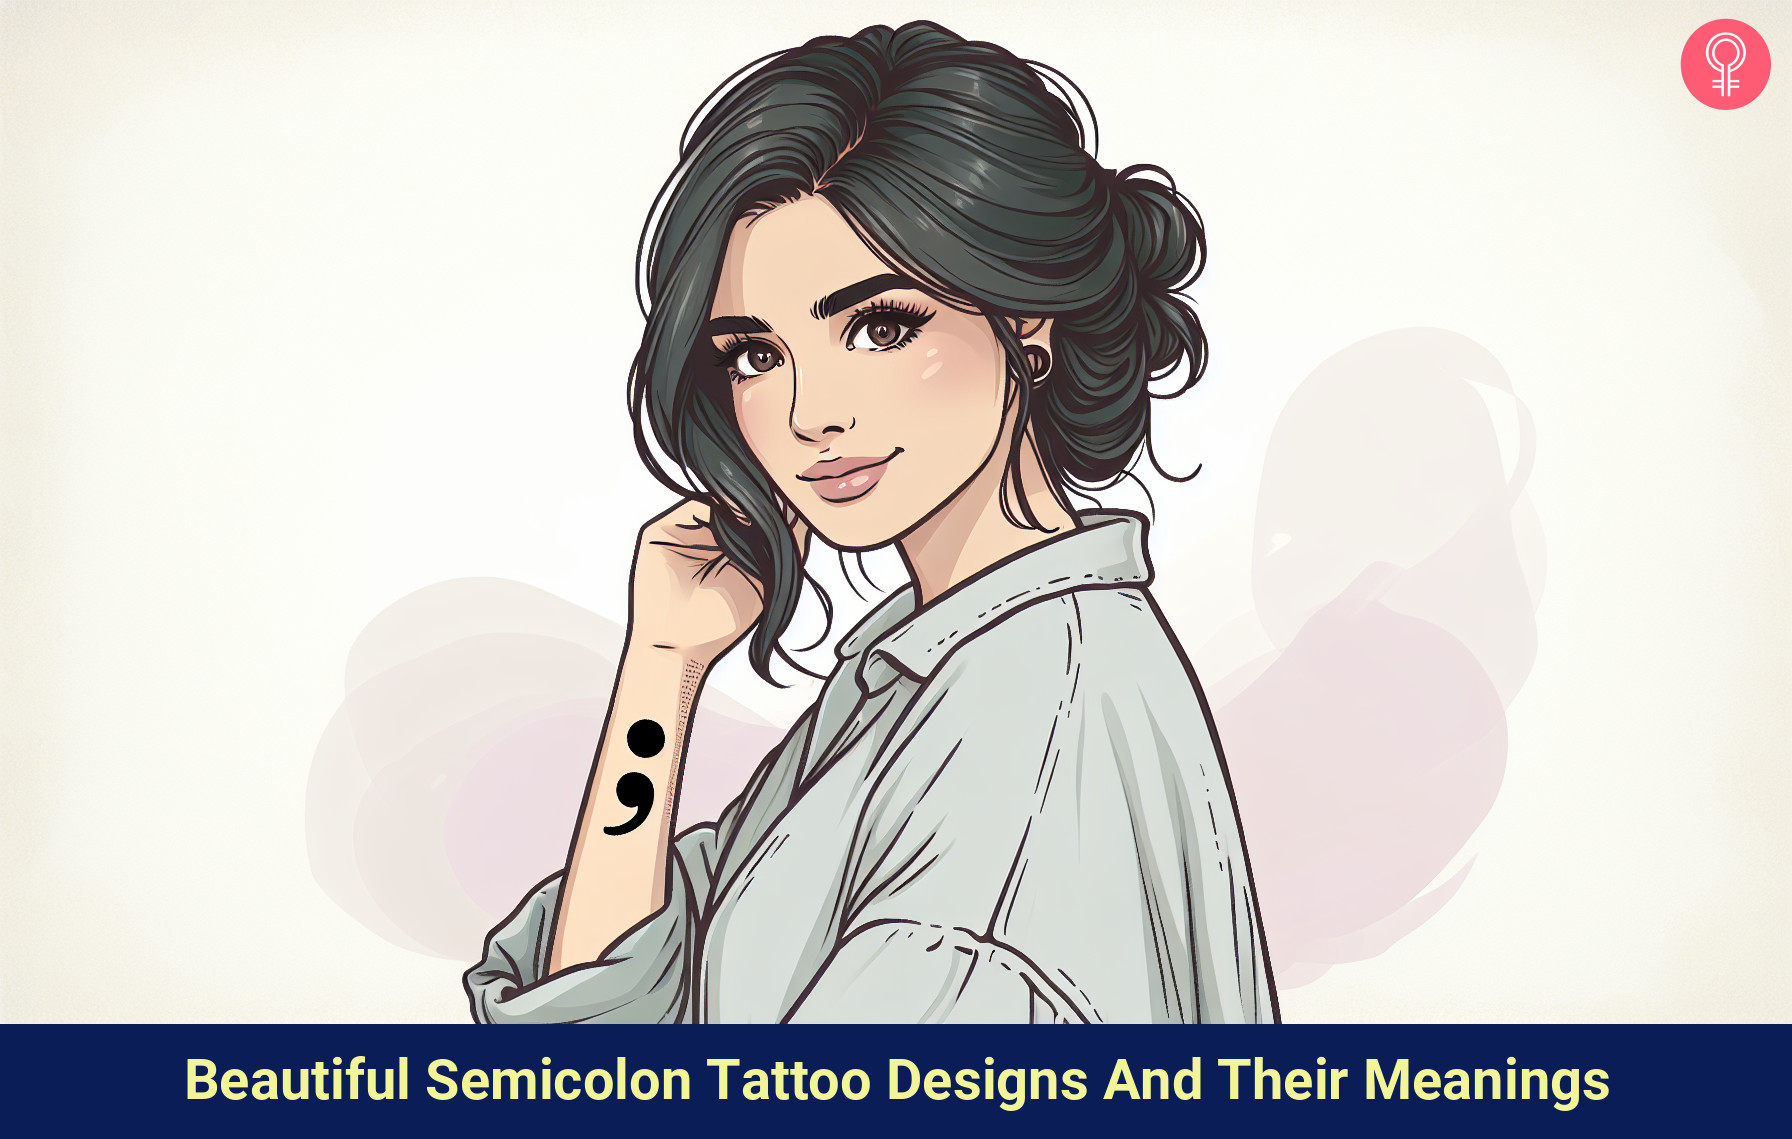 beautiful semicolon tattoo designs and their meanings illustration